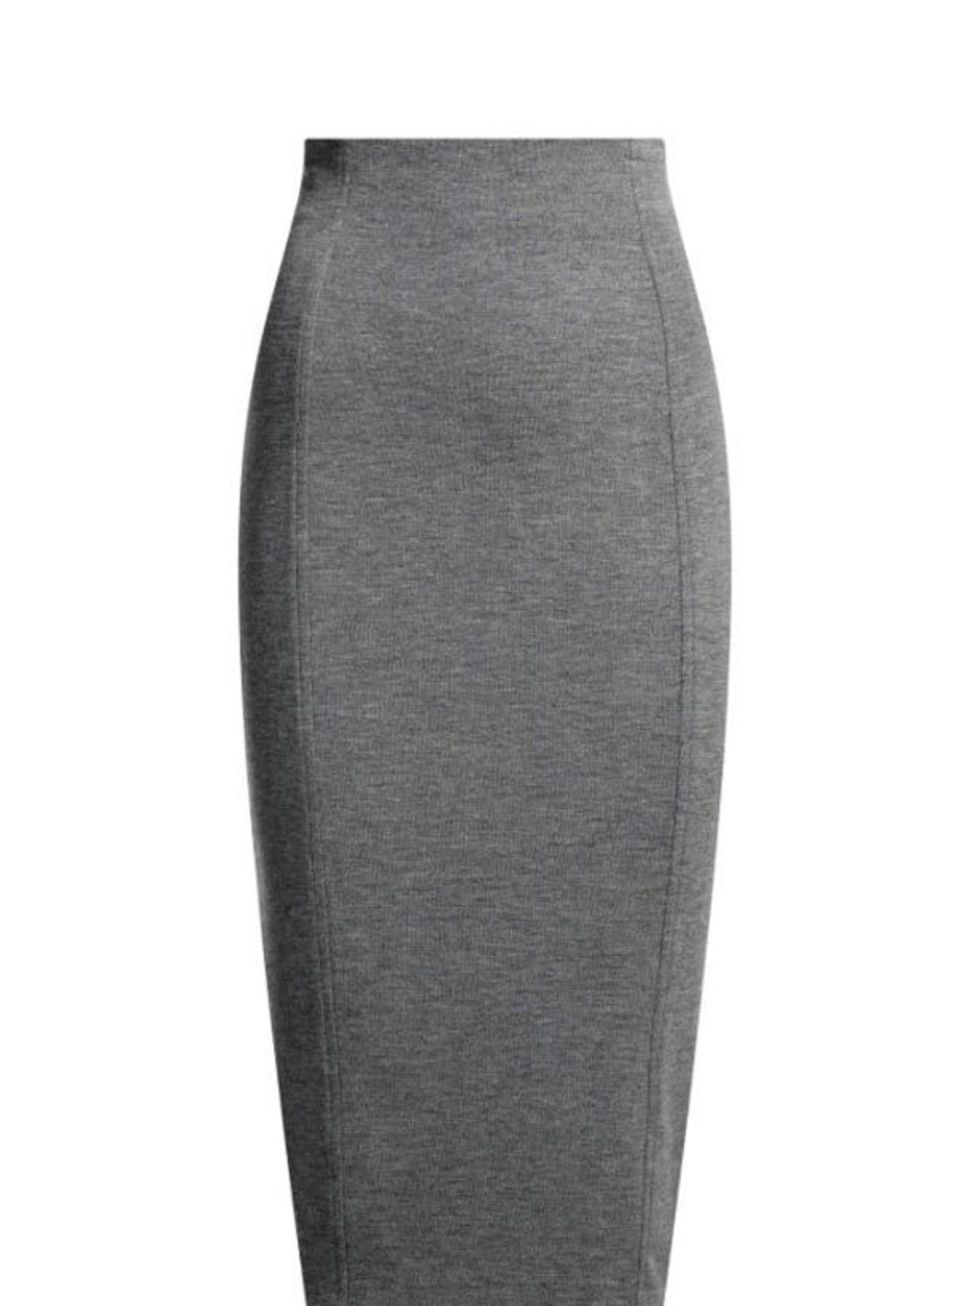 <p> </p><p>The long skirt is everywhere and now you can tap into the trend at work. Versatile and flattering, this structured pencil skirt will look great with a silk shirt. <a href="http://www.isabellaoliver.com/womens-clothing/uk/600/skirts/SK460.html">